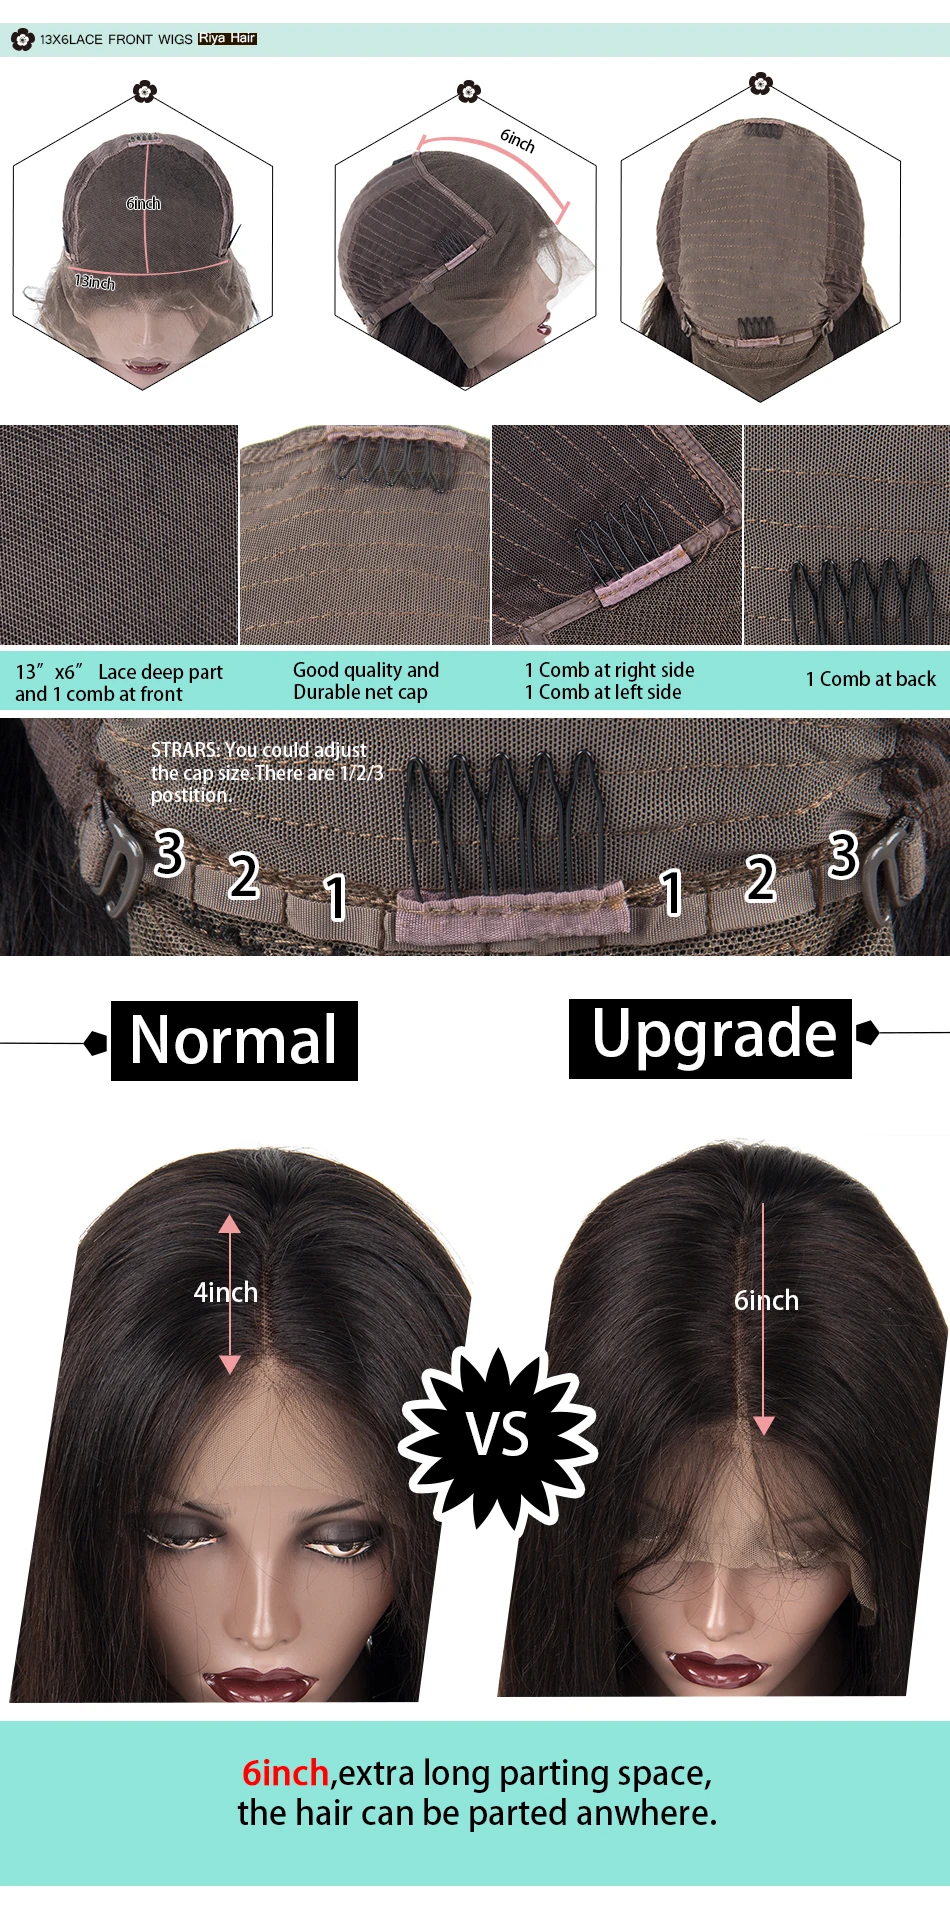 13X6 Invisible Lace Front Human Hair Wigs For Black Women Preplucked H 8-24 Closure Deep Wave Lace Front Wig Brazilian Remy Riya